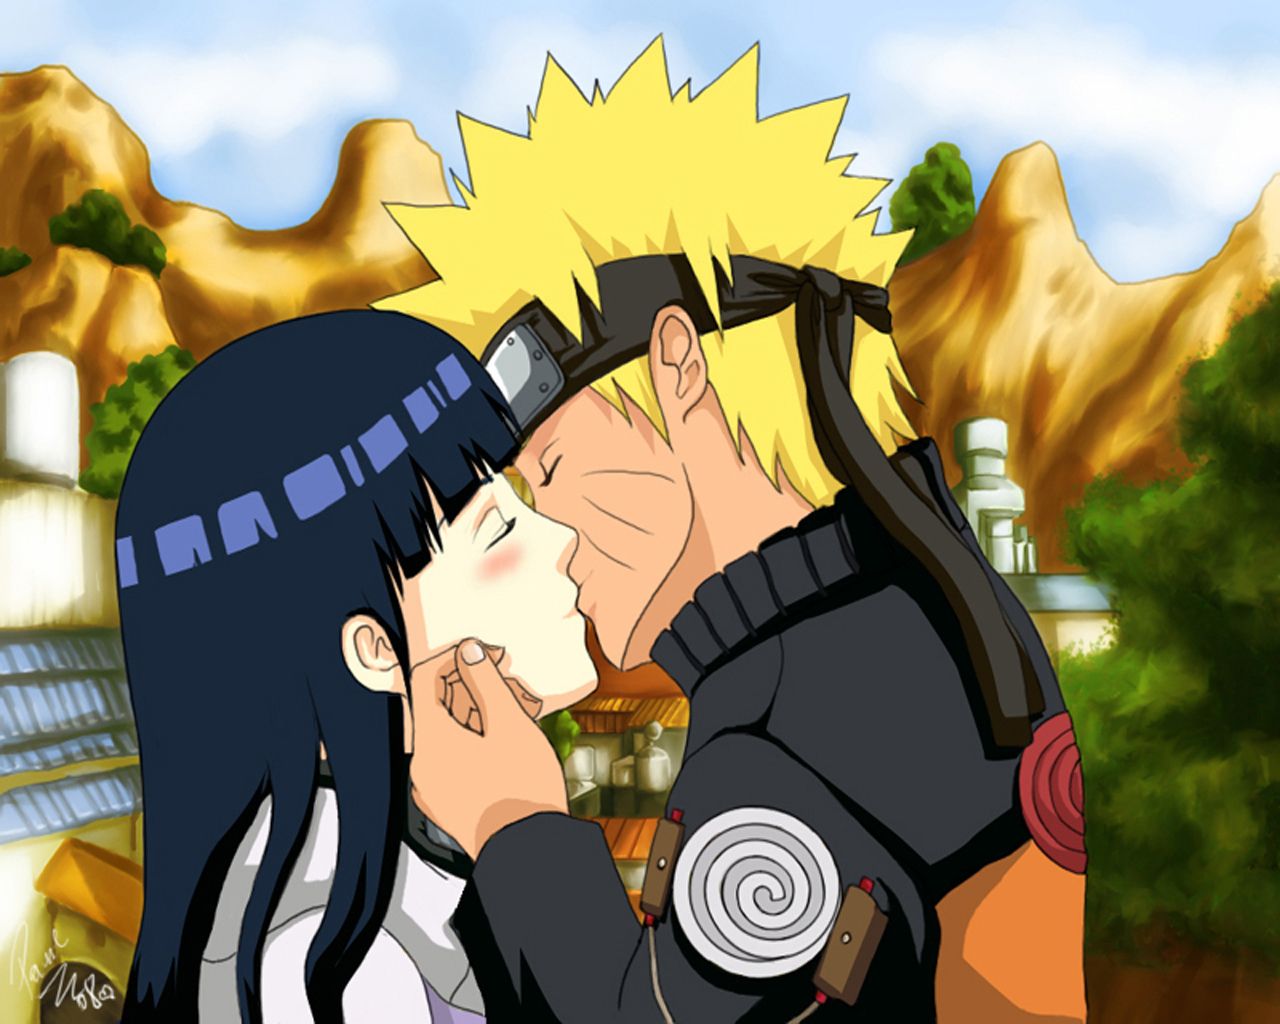 Naruto and Hinata Background for FB Cover - Cartoons Backgrounds